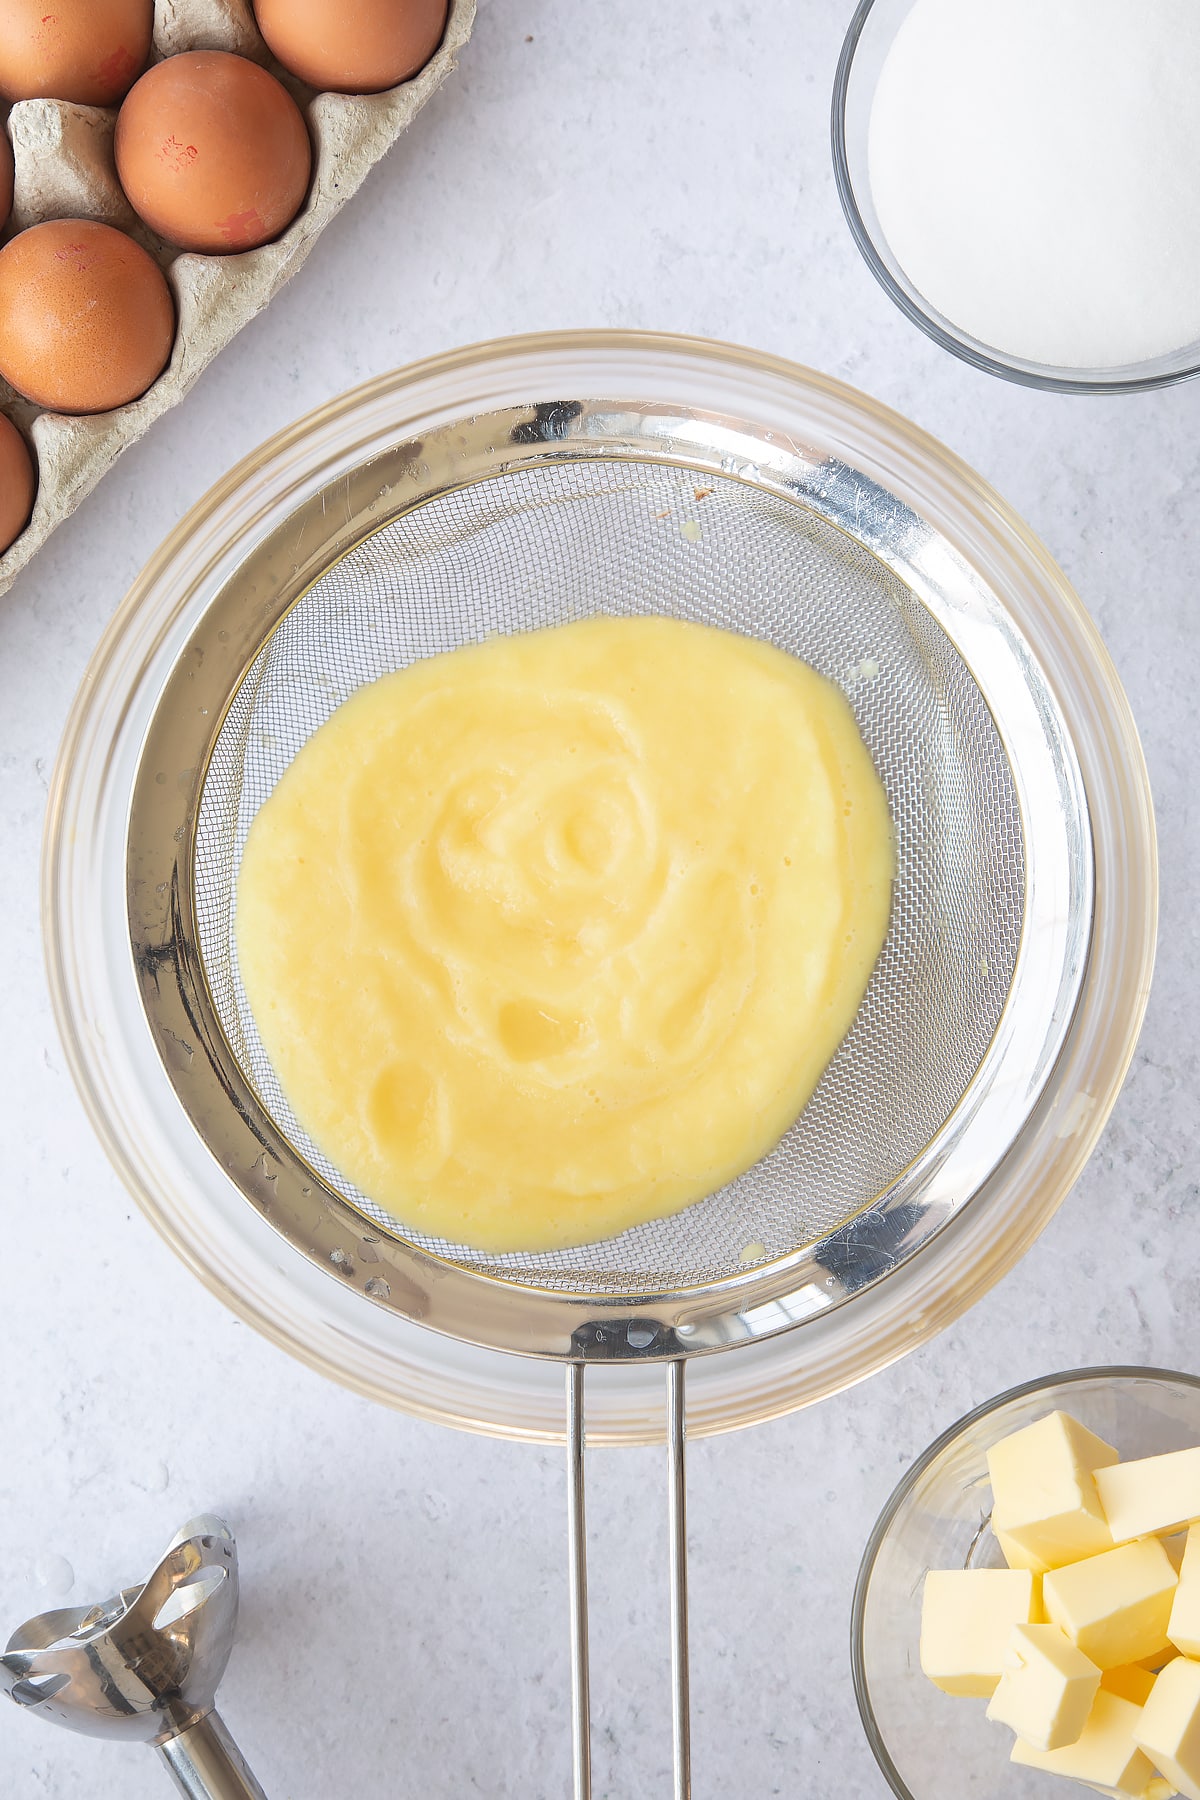 puree'd pineapple in a sieve over a large clear bowl surrounded by ingredients.